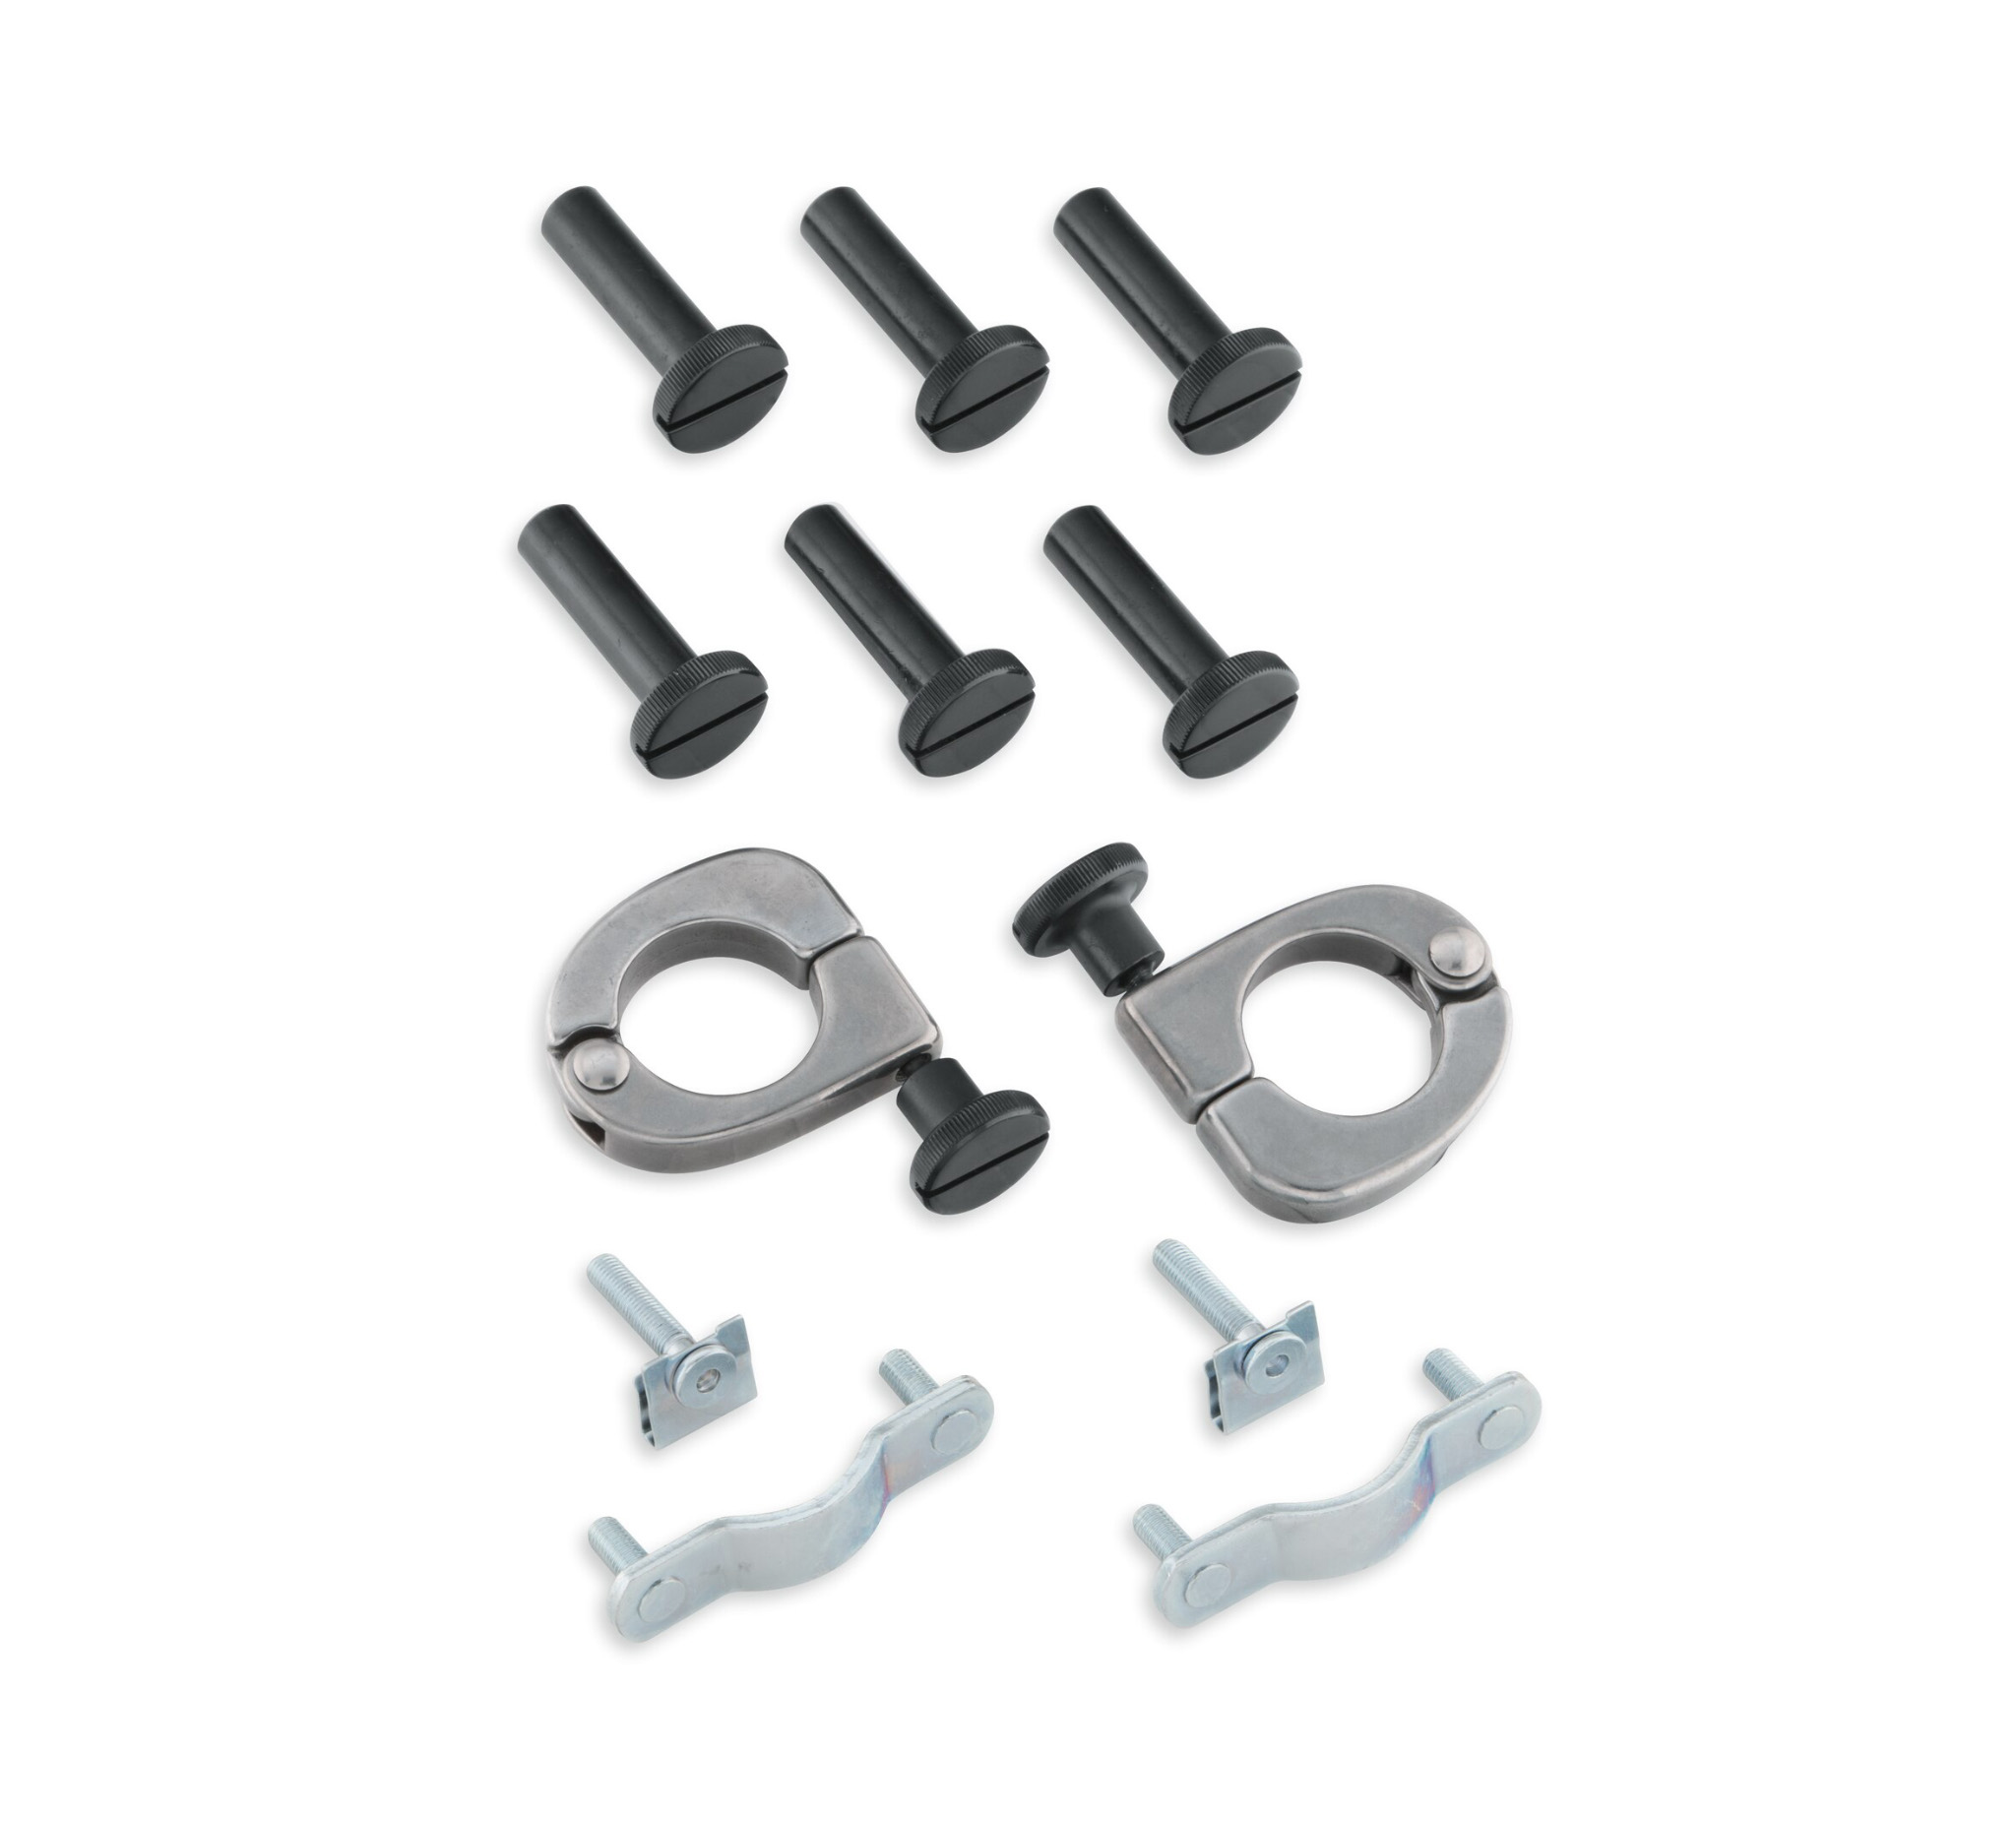 Lower Fairings Quick Release Mounting Hardware Fit For Harley Touring 1989-2013 